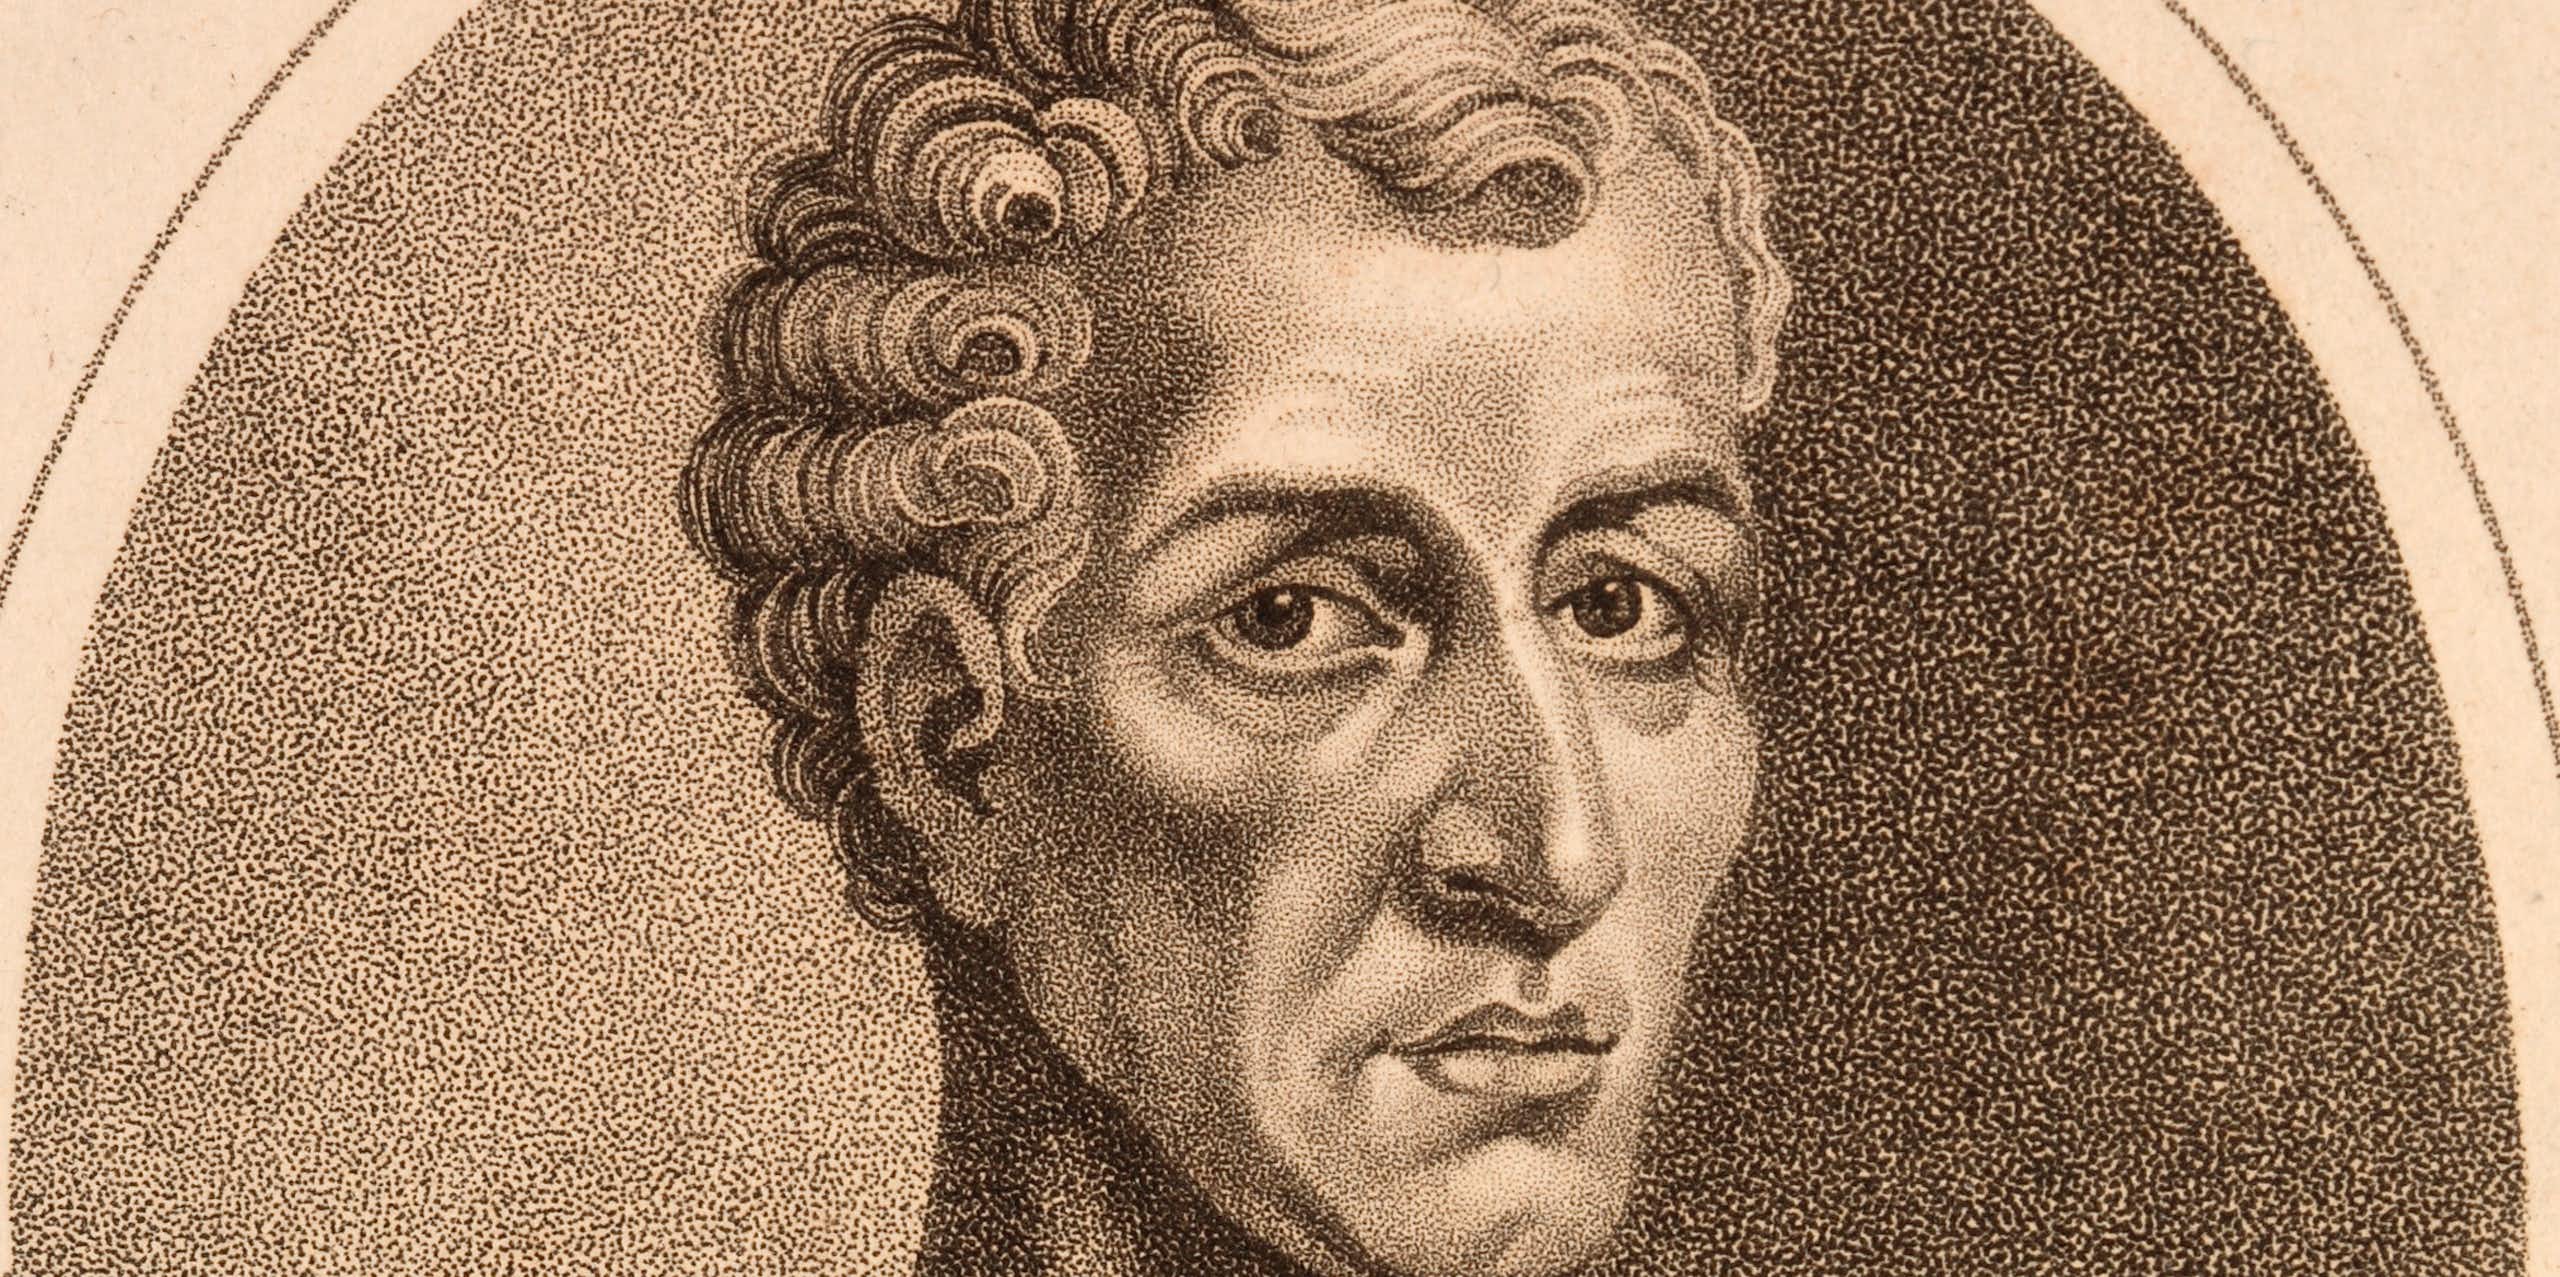 A grainy black and white drawing showing the face of a young man with curly hair.